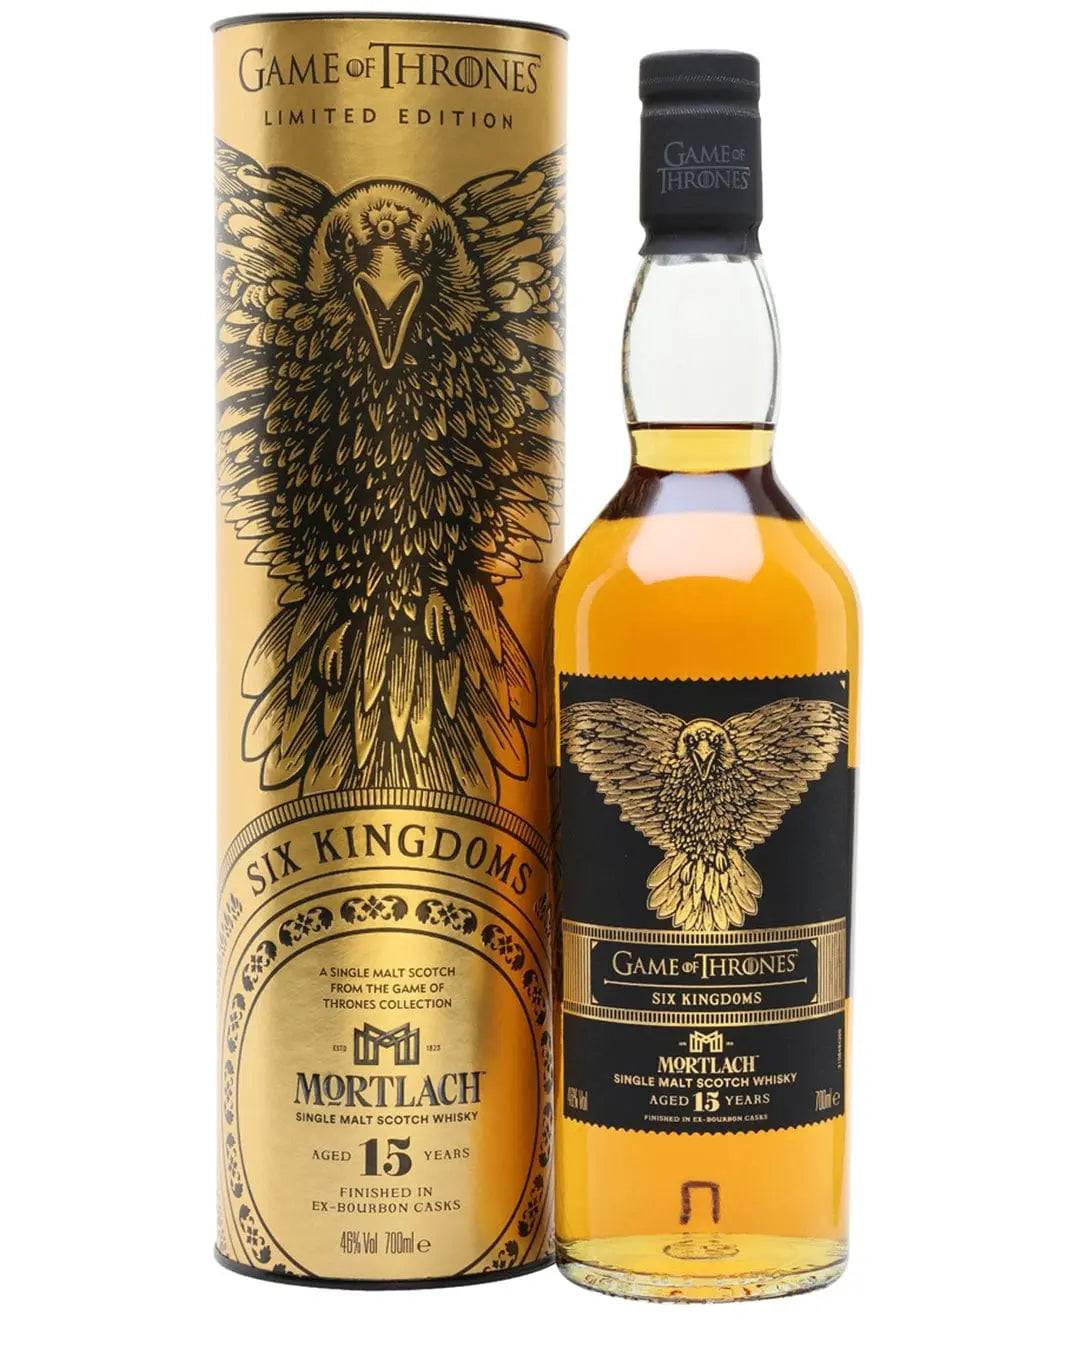 Game of Thrones Six Kingdoms - Mortlach 15 Year Old Select Reserve Malt Whisky, 70 cl Whisky 5000281060545